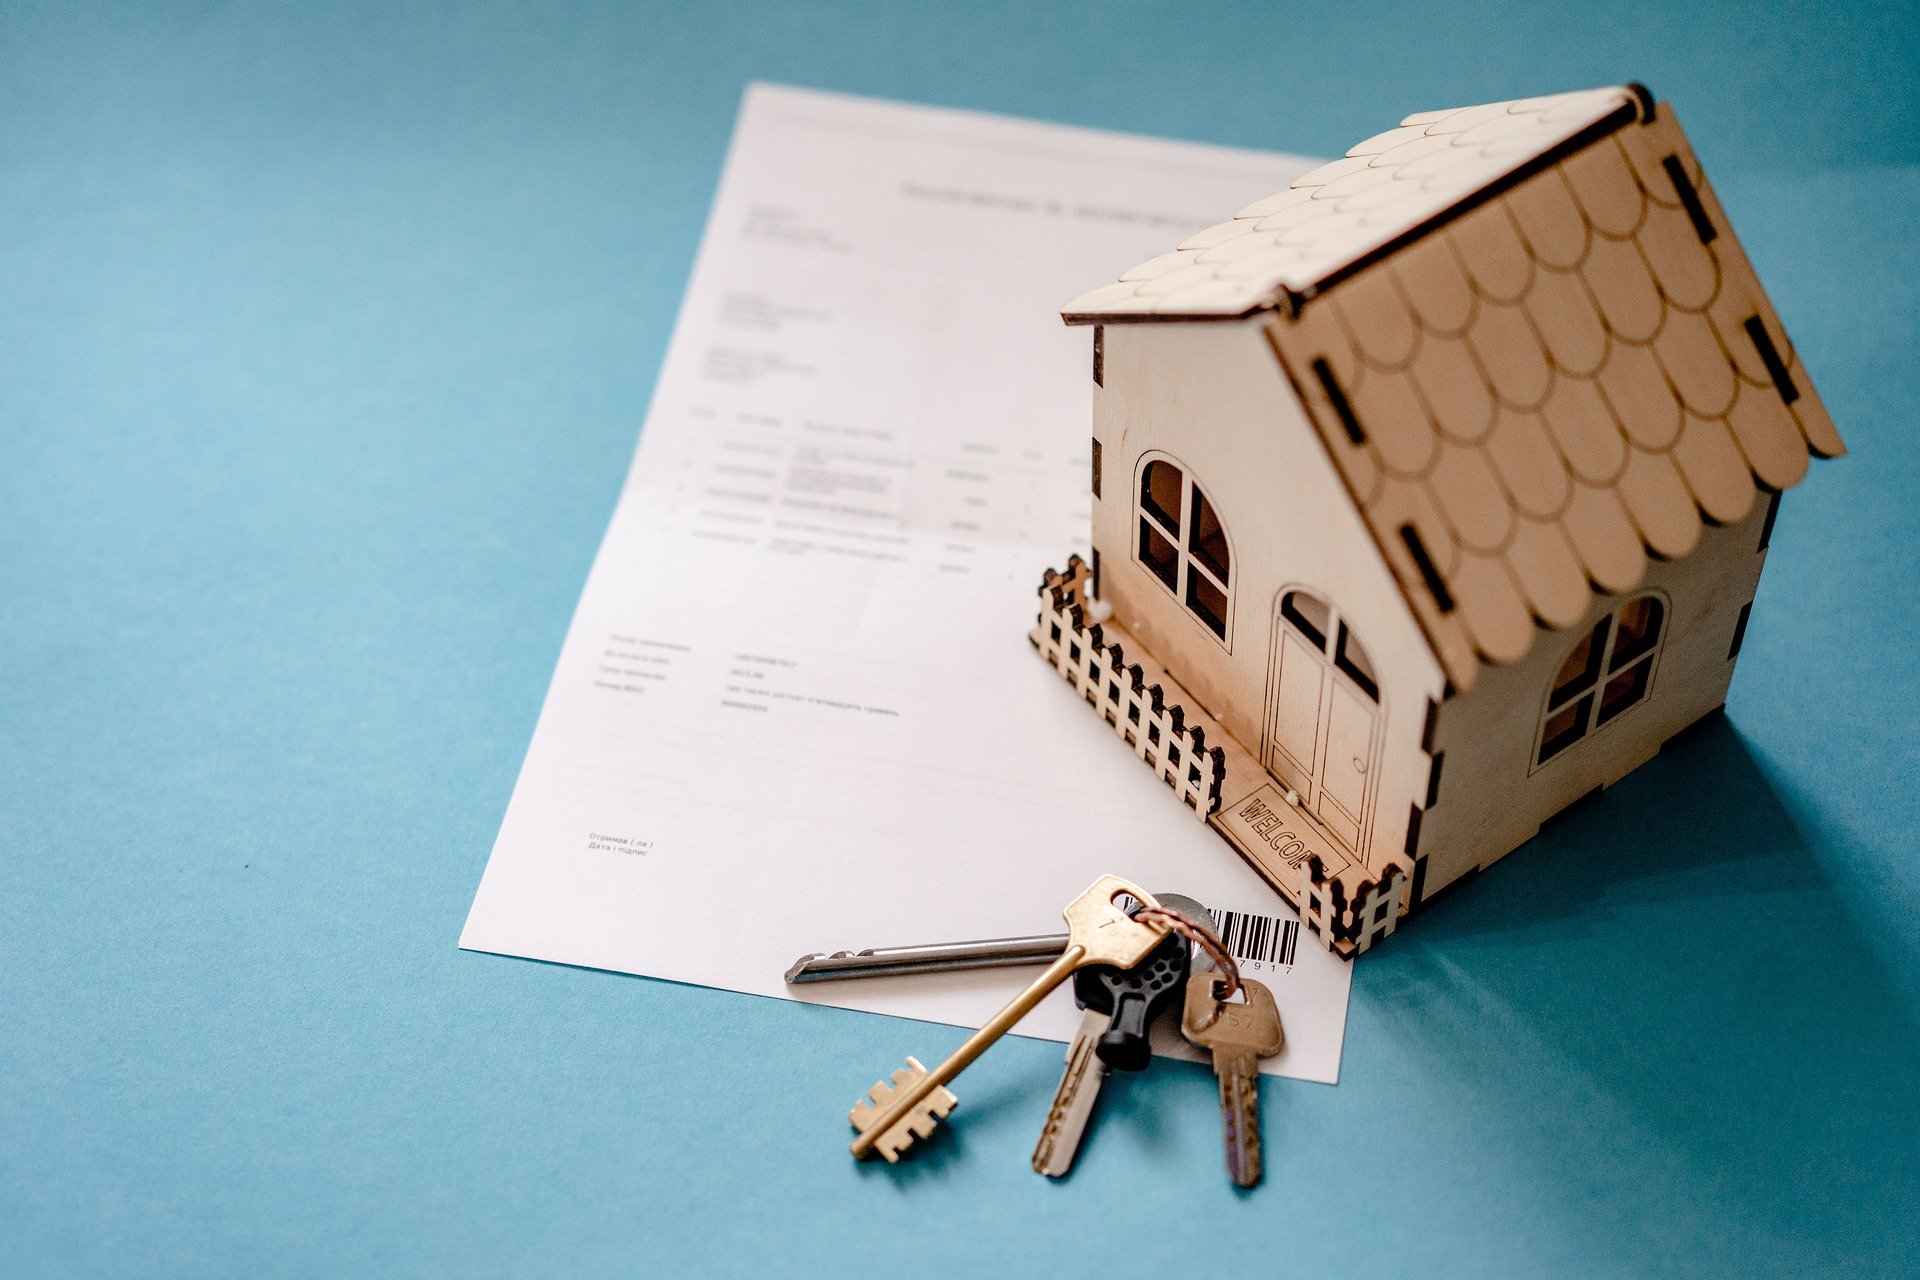 Unpaid Real Estate Taxes May Jeopardize Your Property Ownership